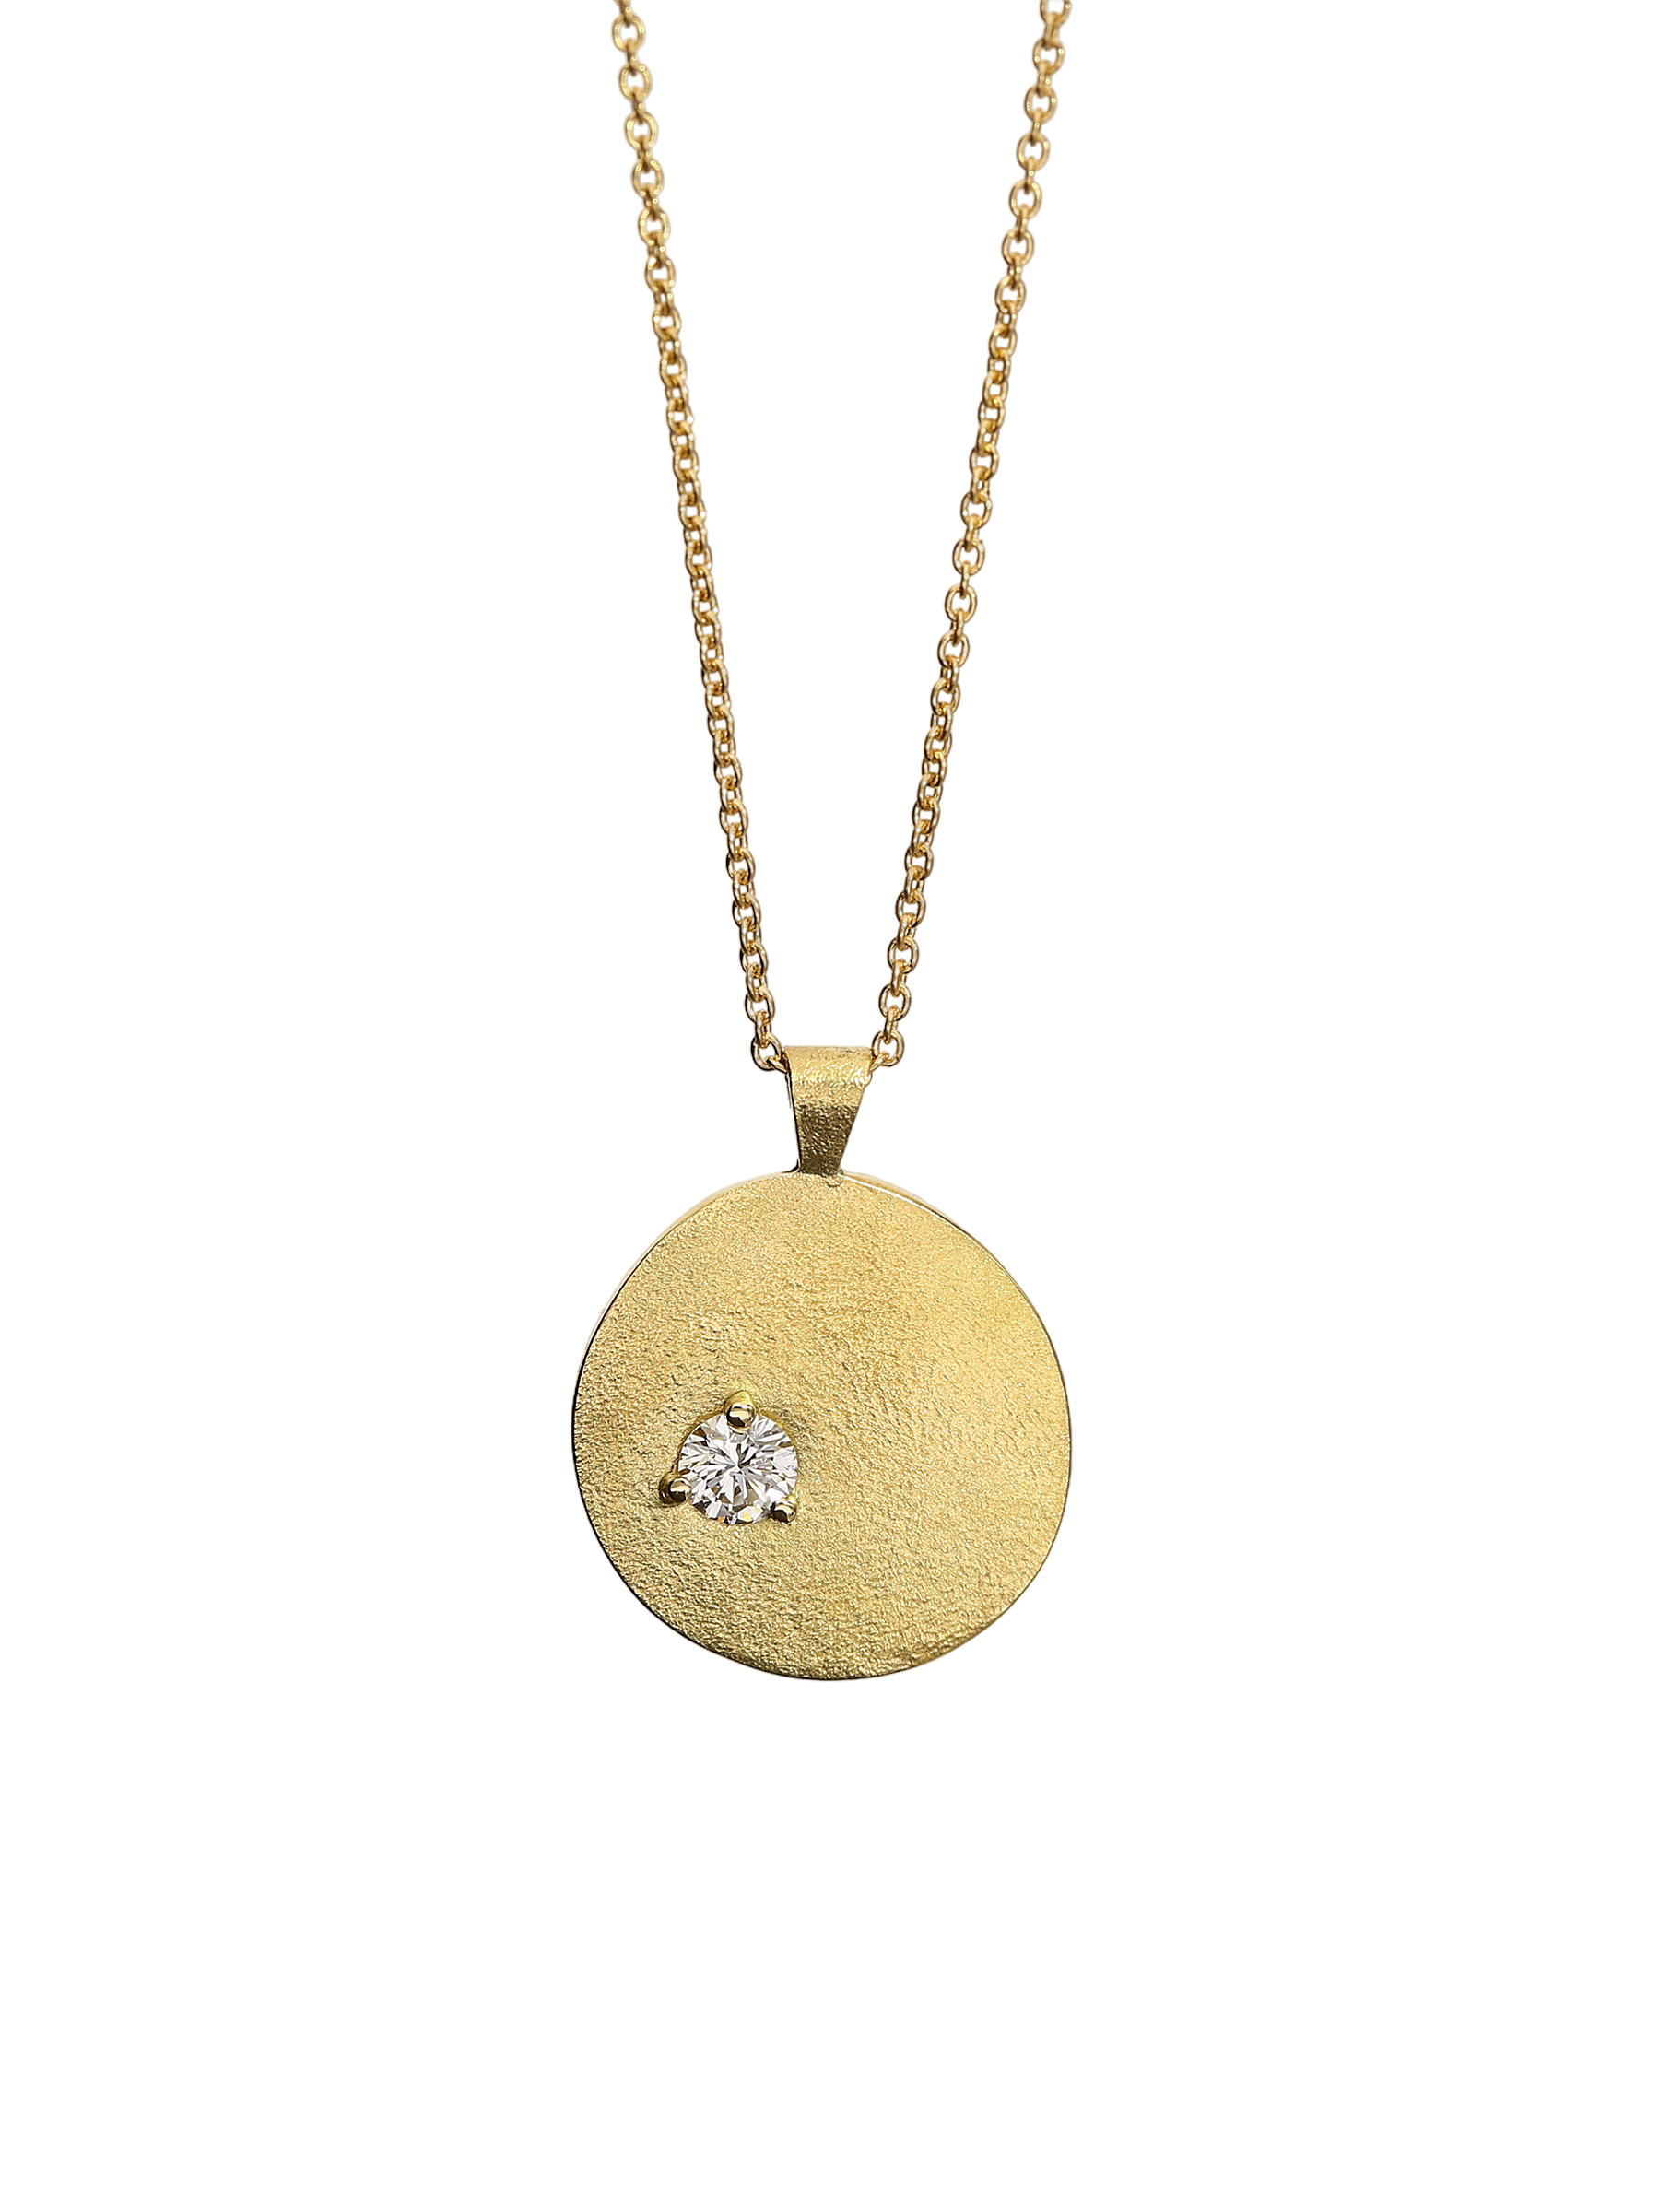 Lv Inspired Medallion Necklace / Kamille Gems Stone Jewelry